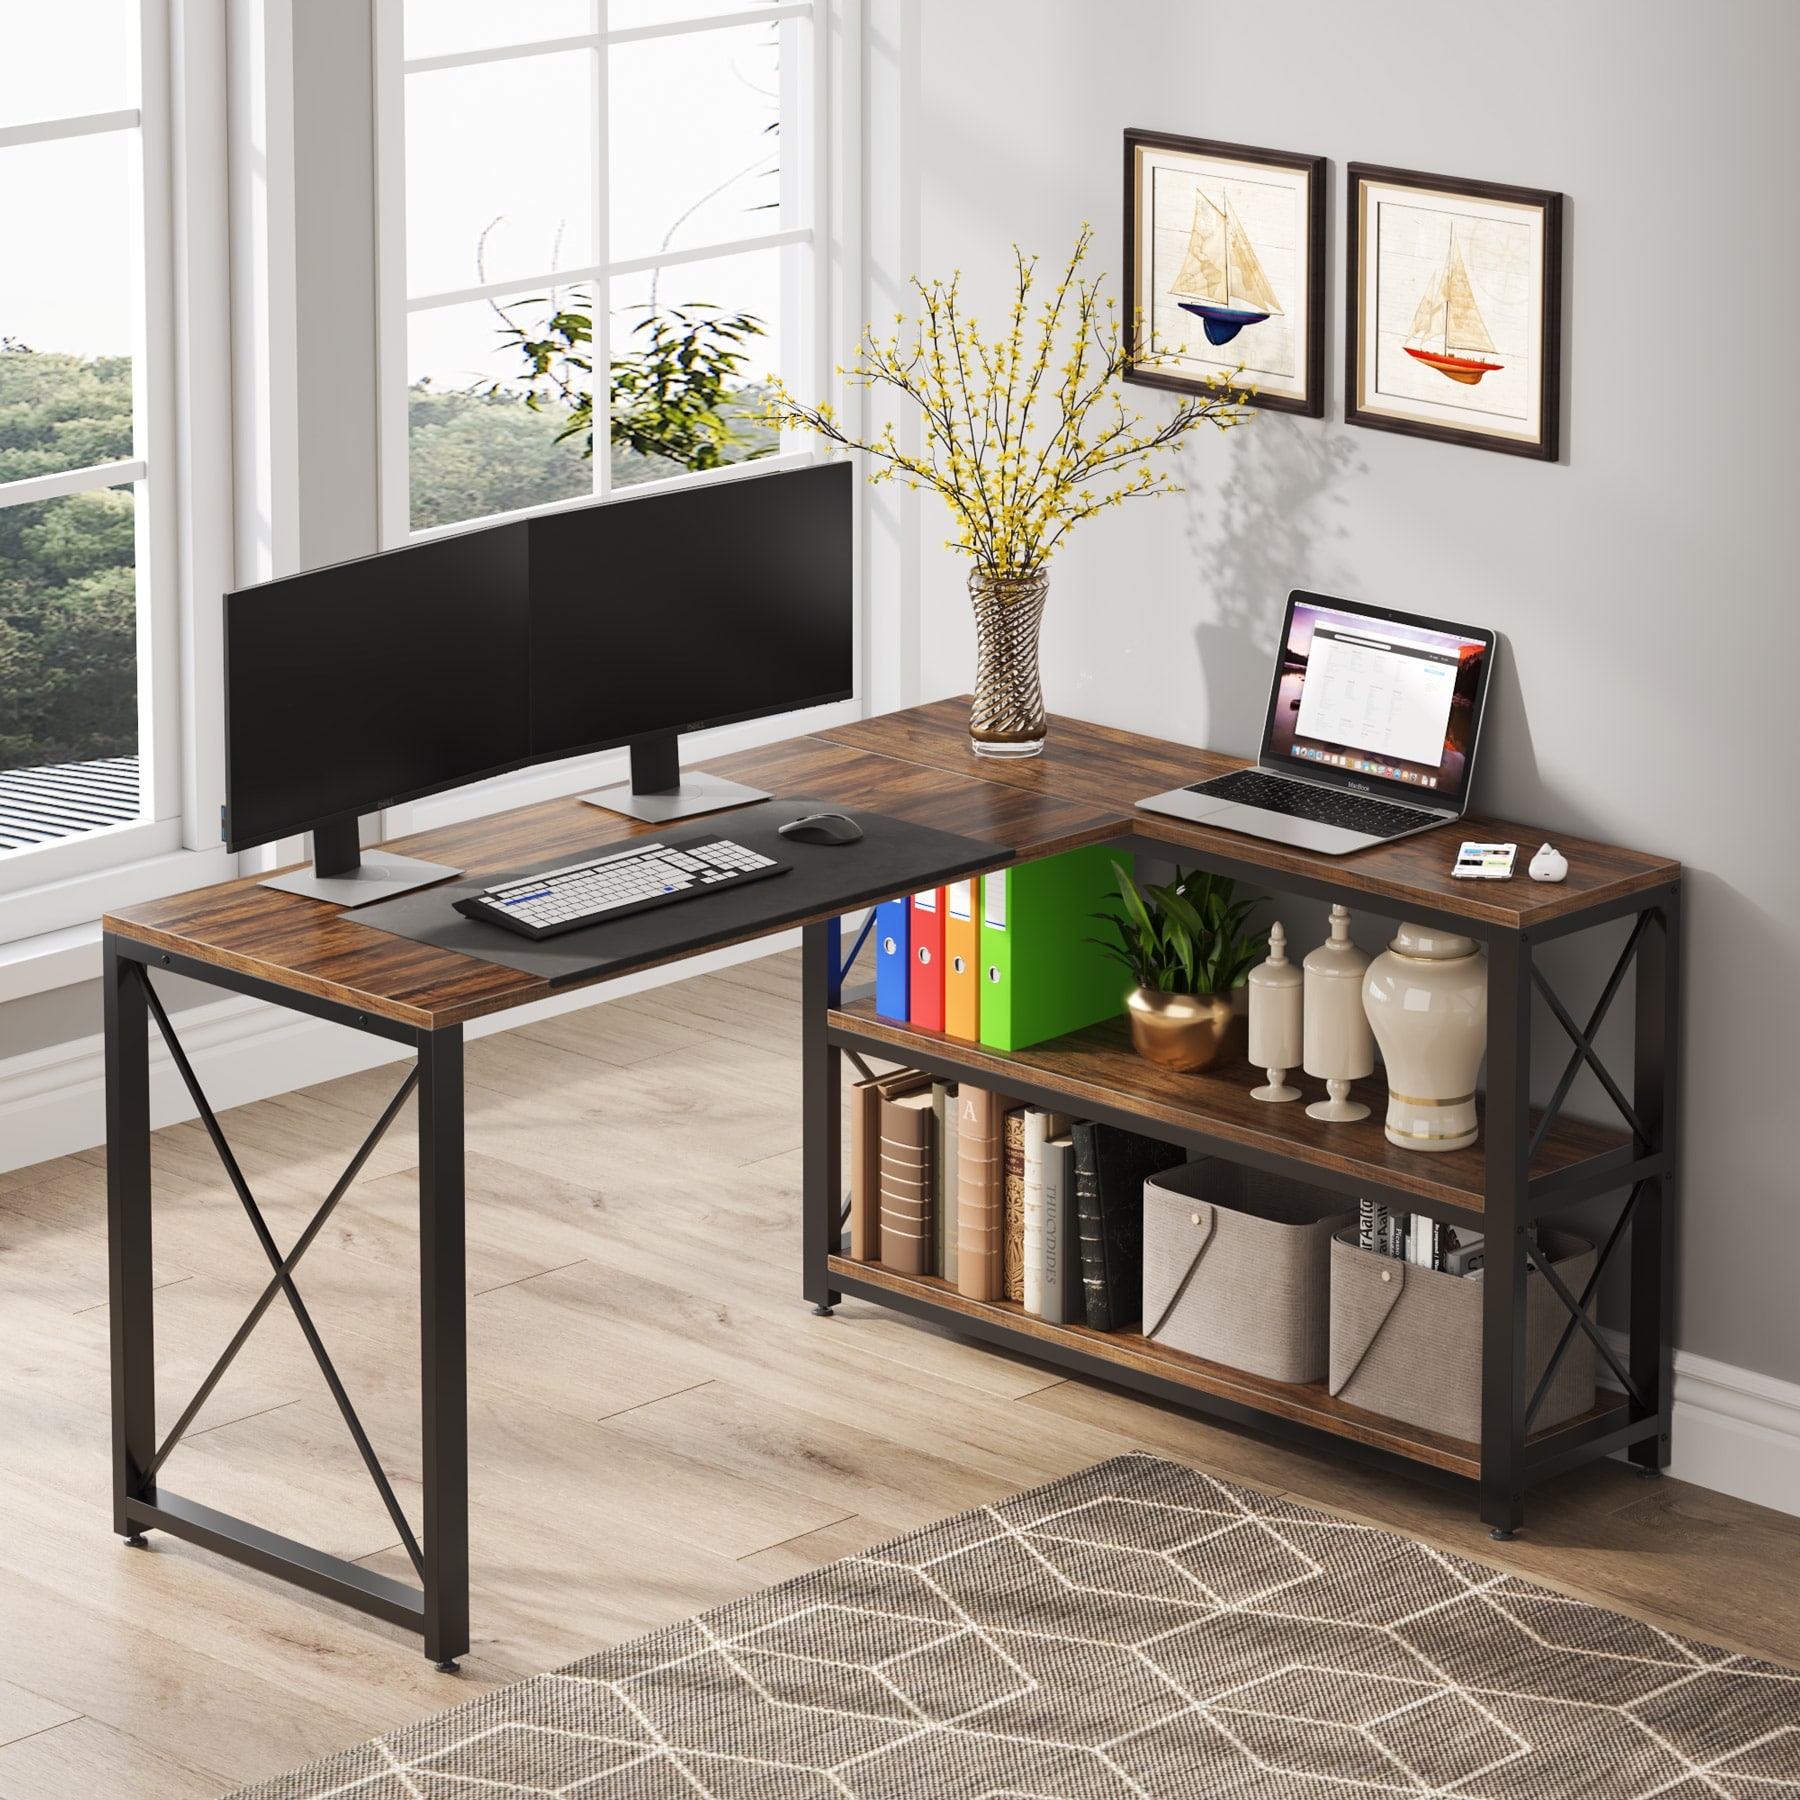 https://ak1.ostkcdn.com/images/products/is/images/direct/d3d6cf193e4c70612f20b8fd4f0e19f7020b54e2/Tribesigns-Reversible-Industrial-L-Shaped-Desk-with-Storage-Shelves%2C-Corner-Computer-Desk-for-Home-Office-Small-Space%2C-Brown.jpg